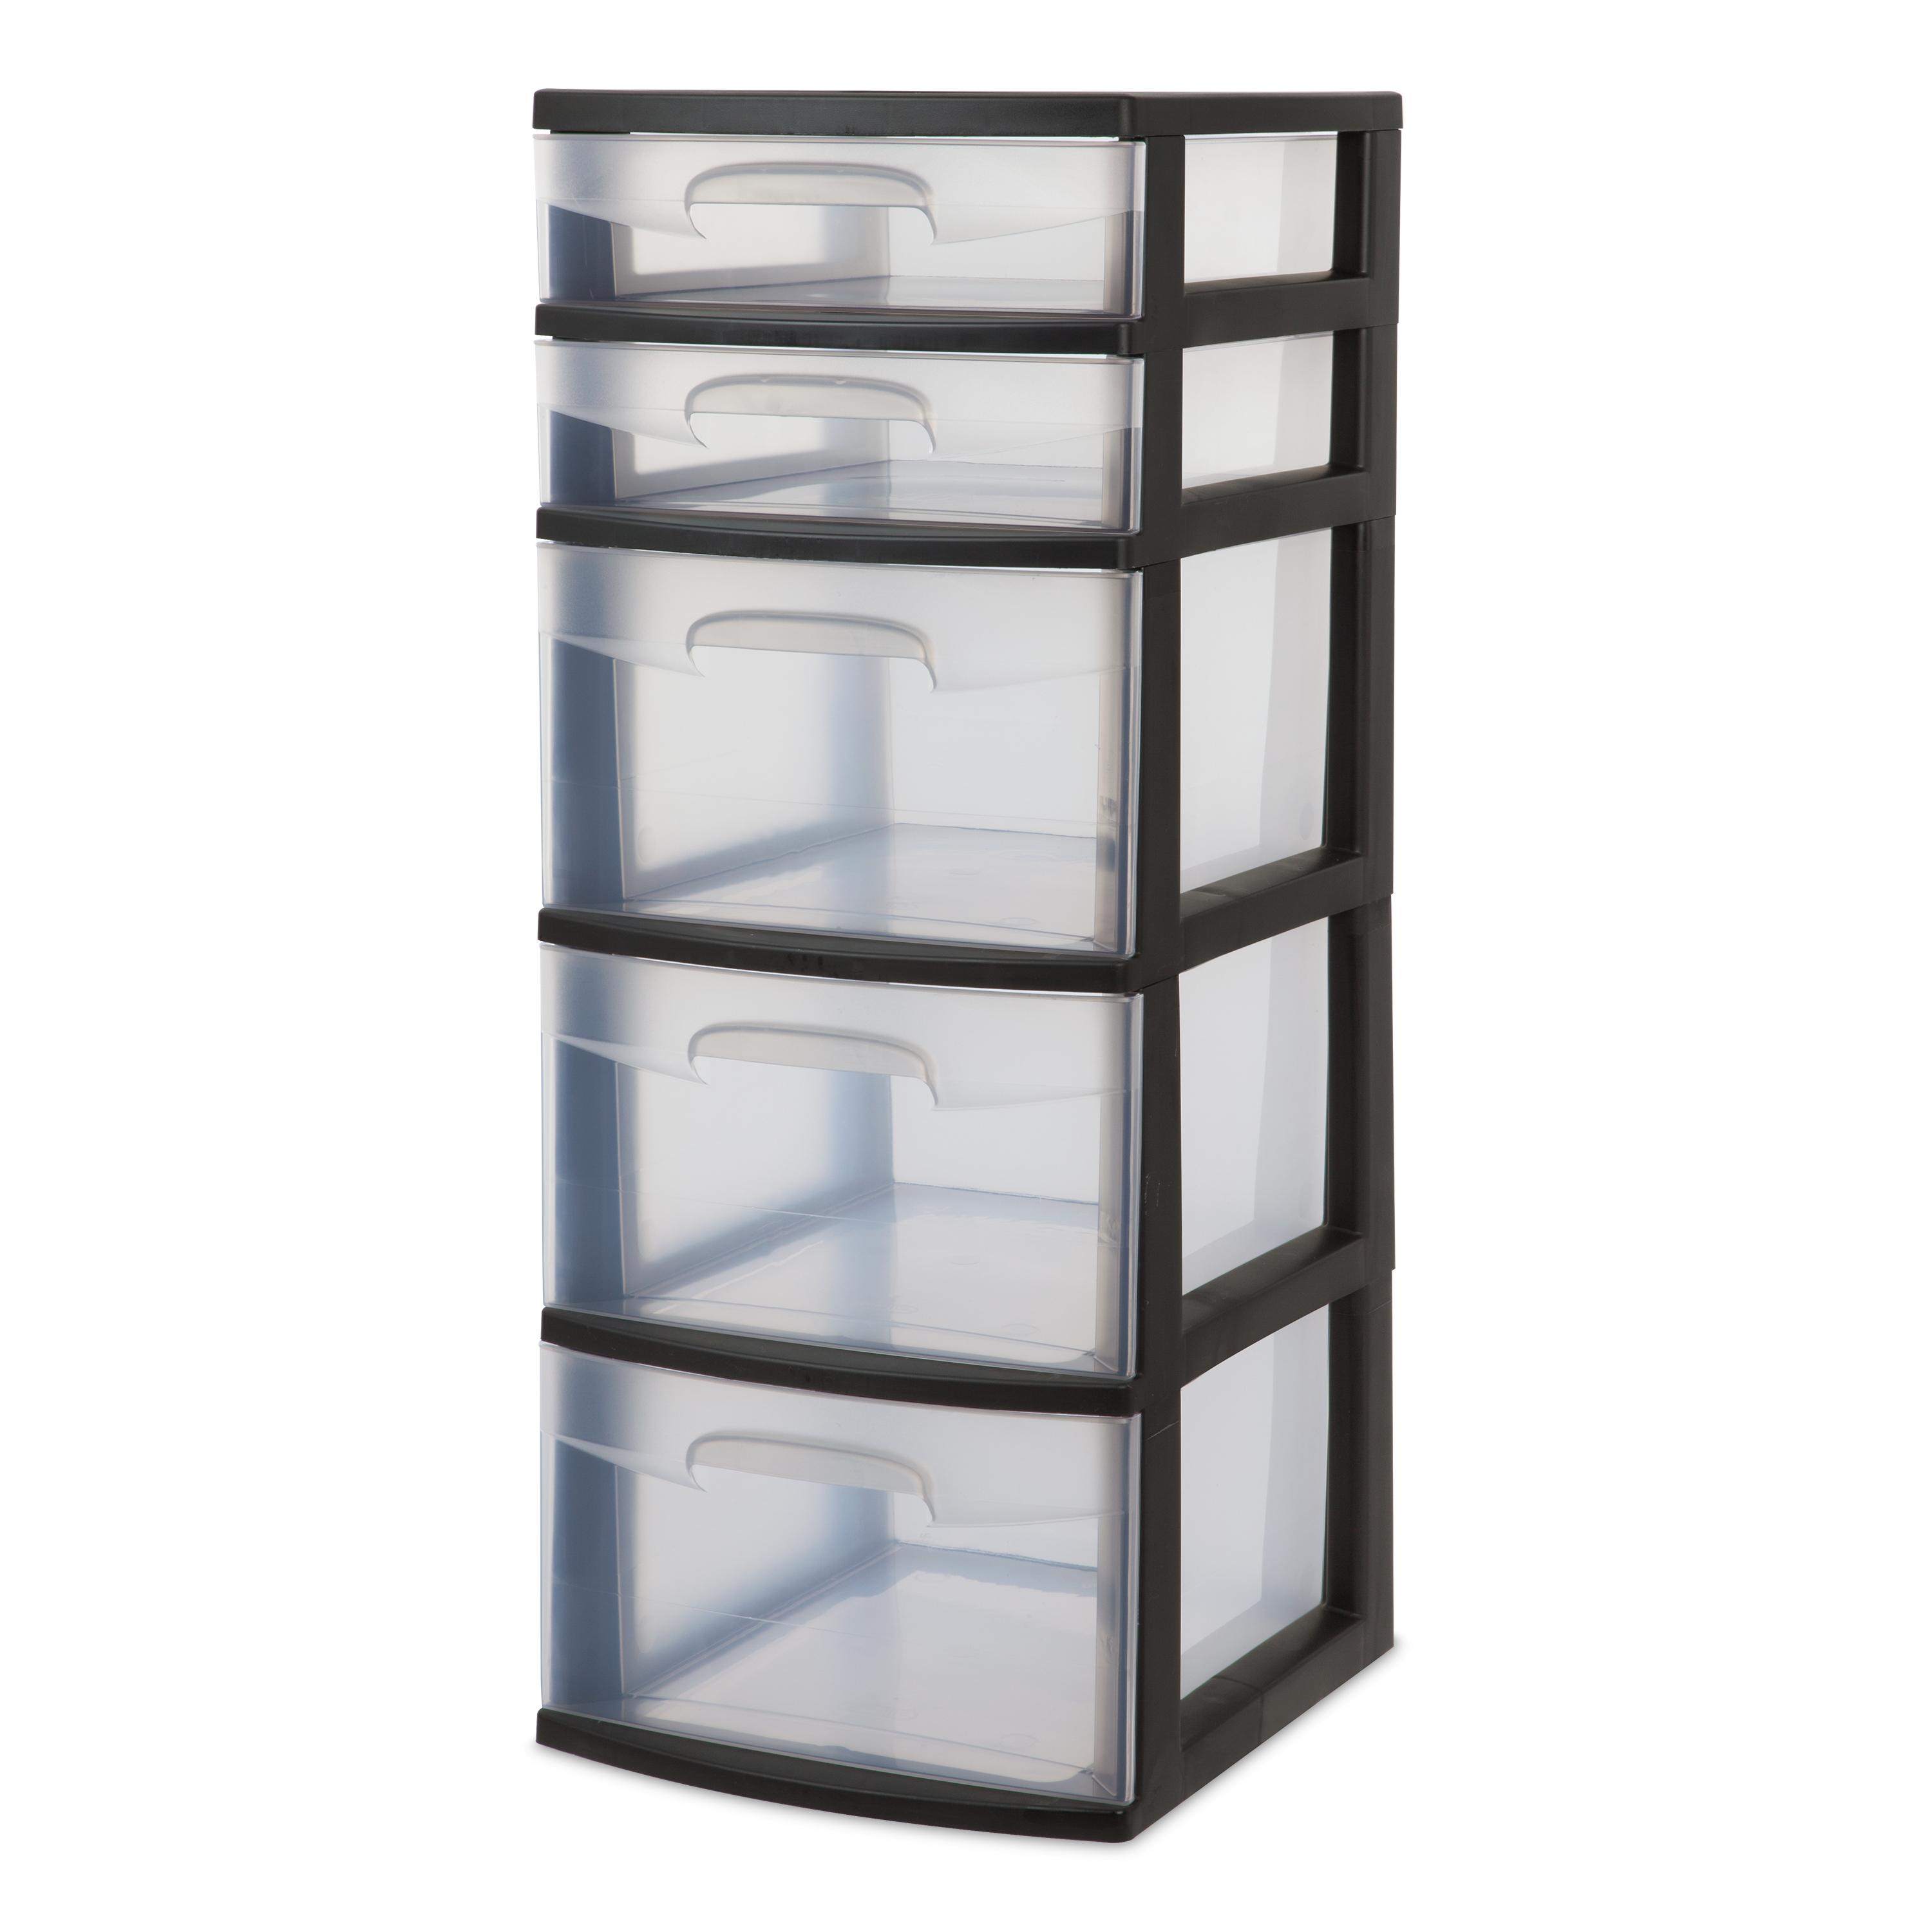 Sterilite Plastic 5-Drawer Tower, Black with Clear Drawers, Adult - image 1 of 6